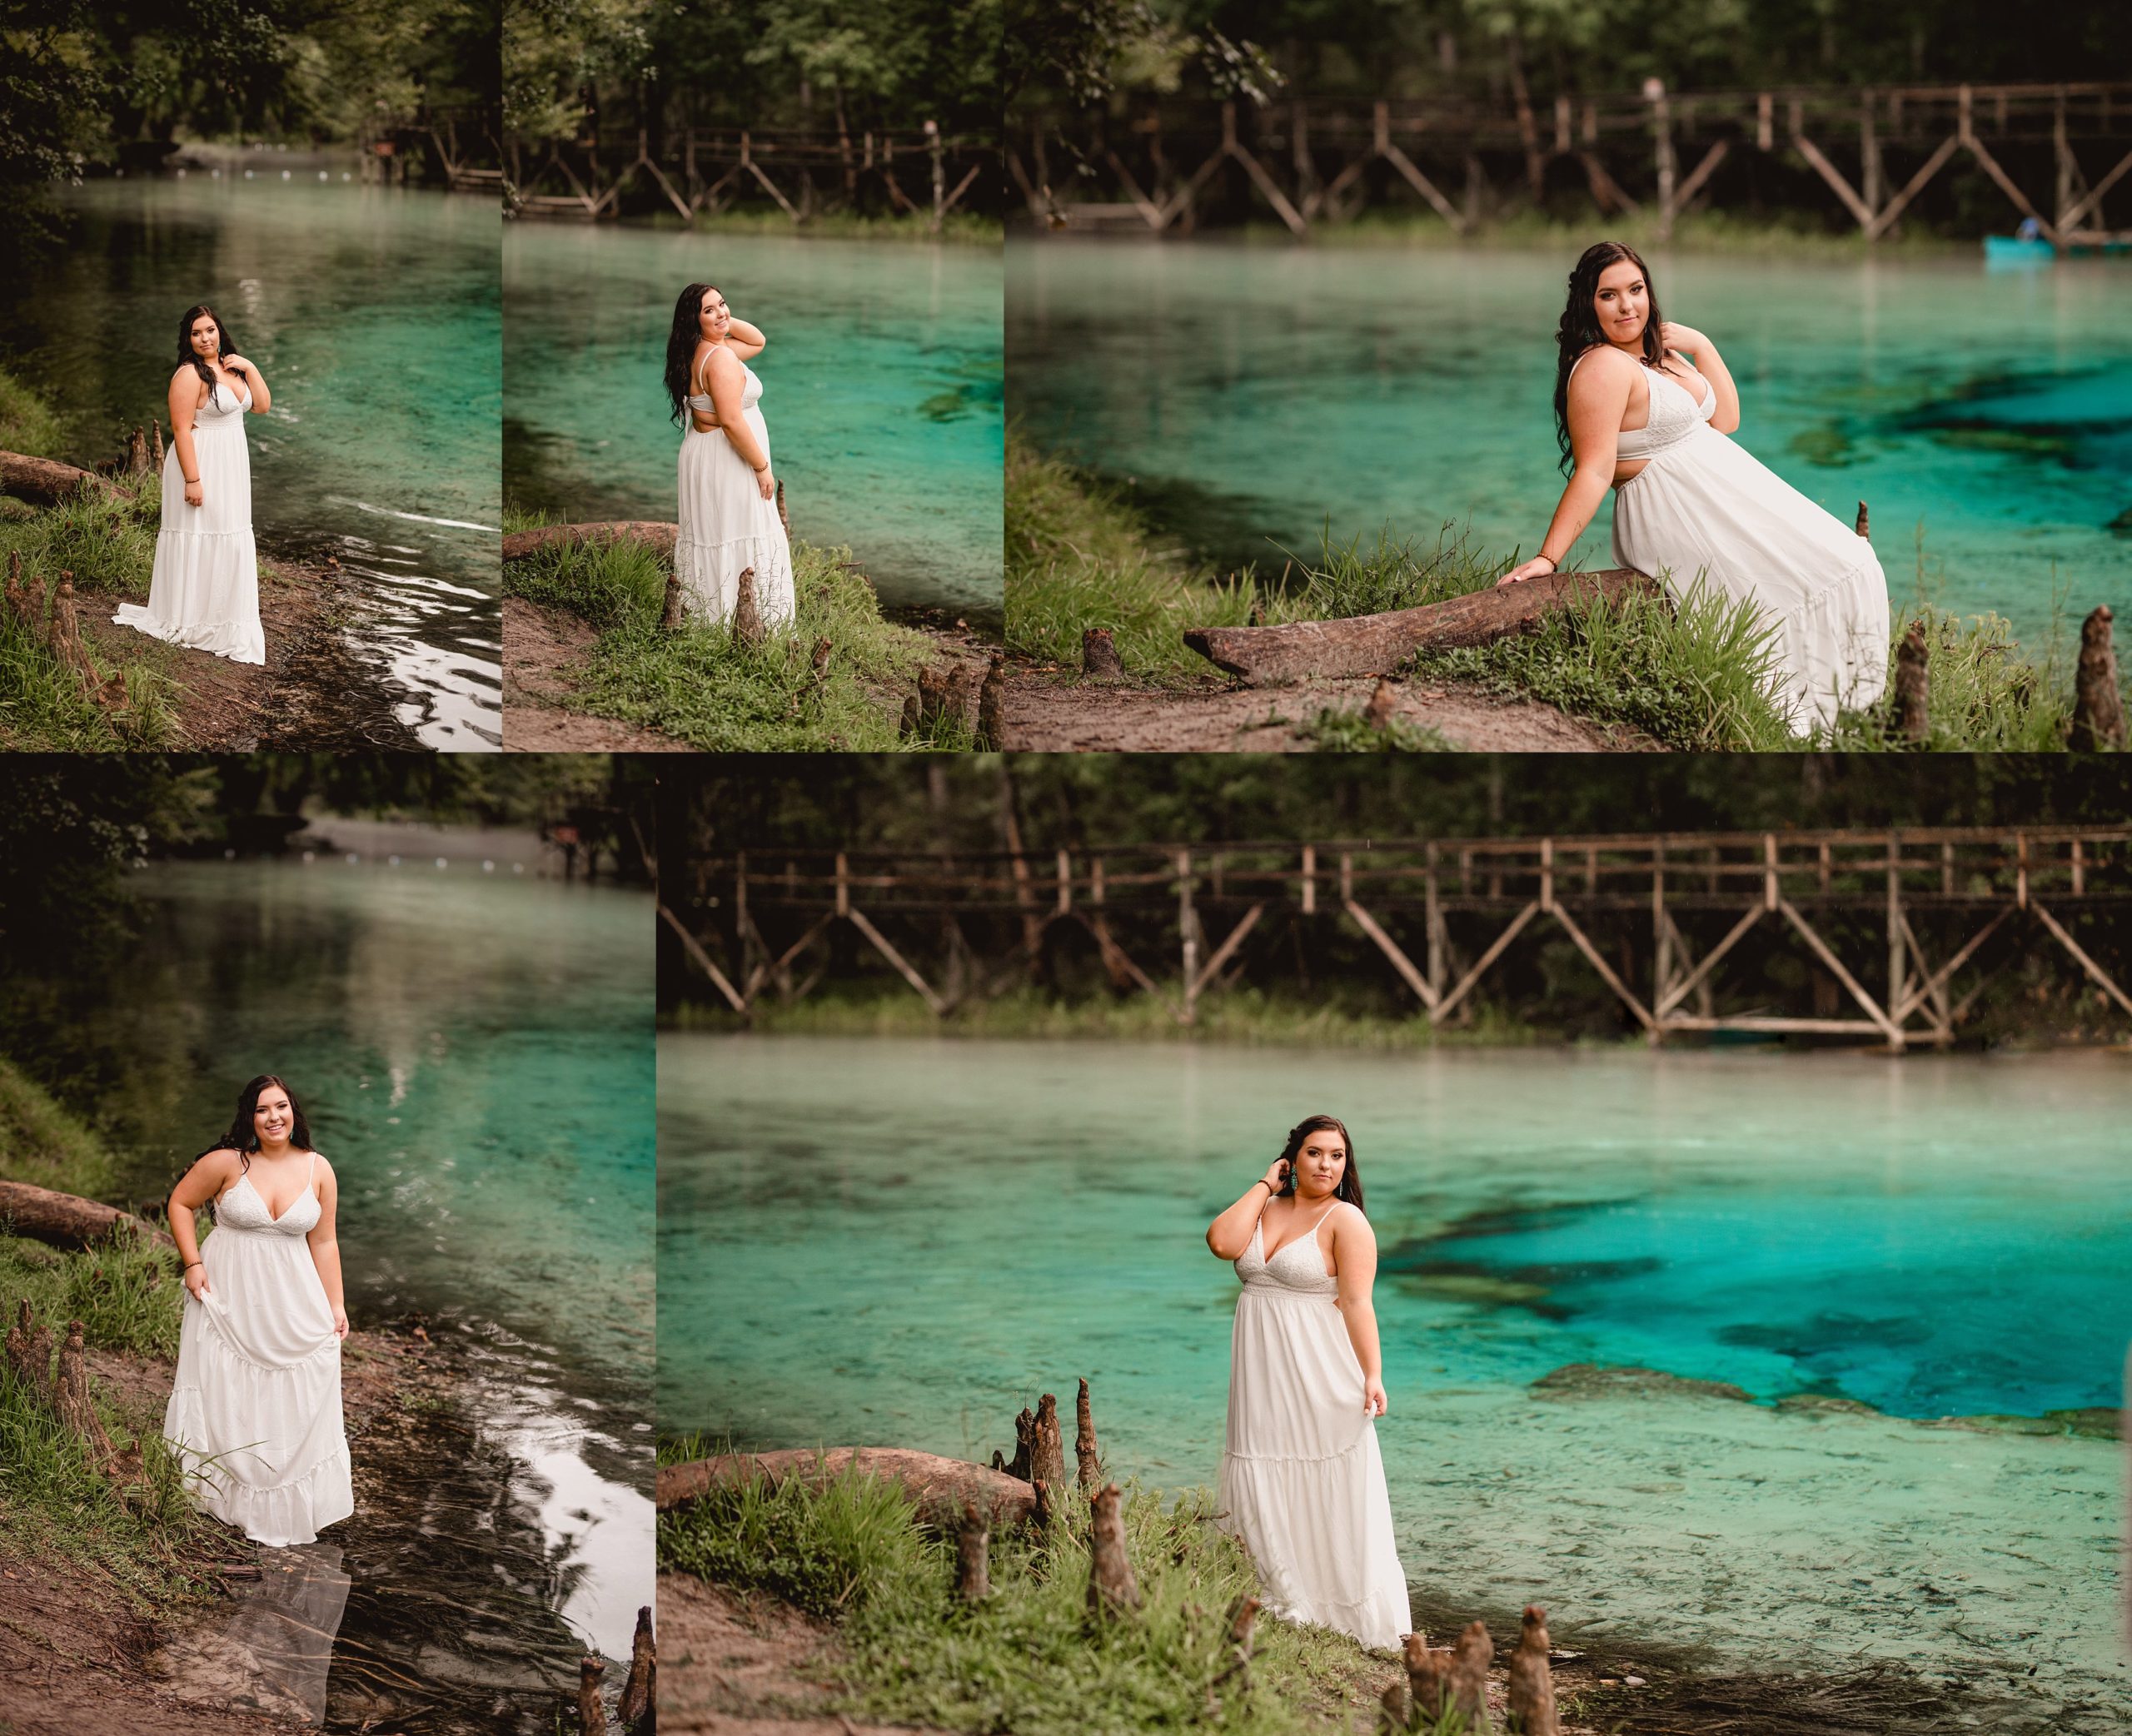 Professional high school senior photographer in North Florida takes photos at the natural springs.